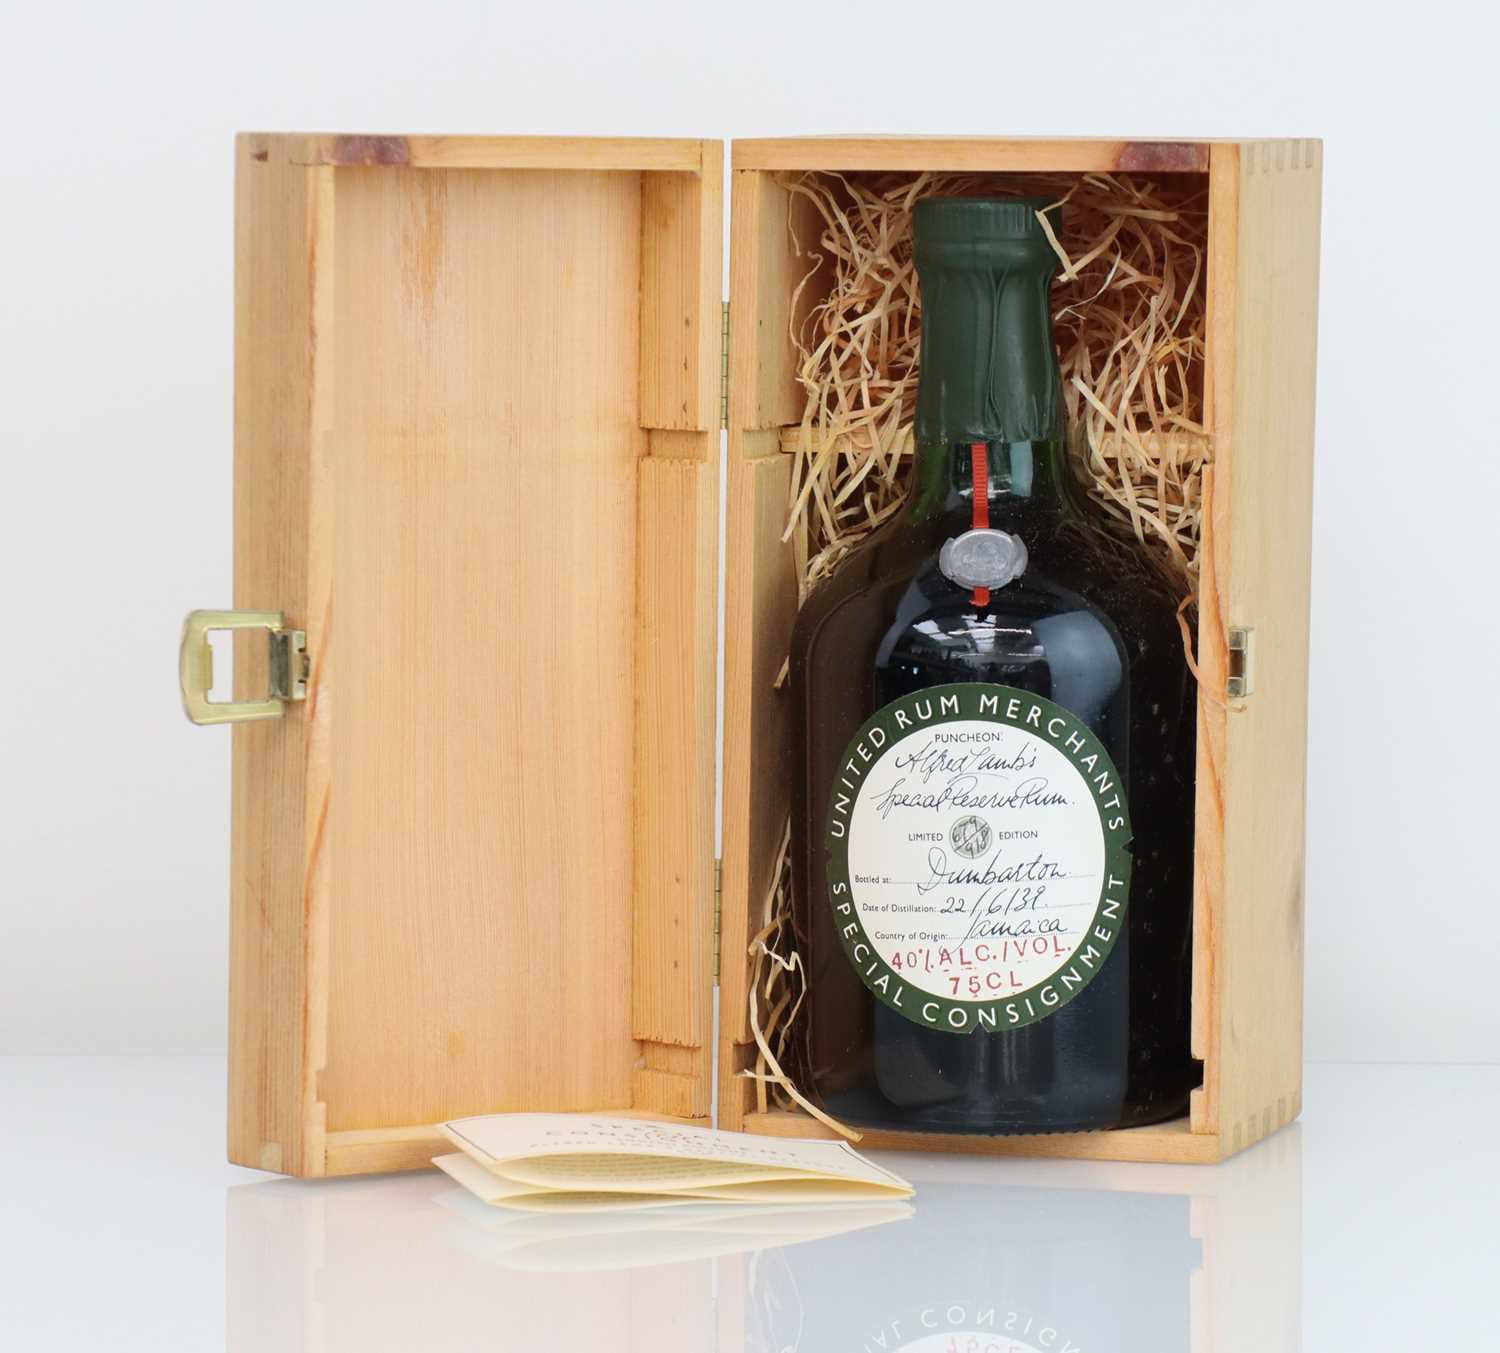 Lot 67 - A bottle of Alfred Lamb's Special Reserve Rum...